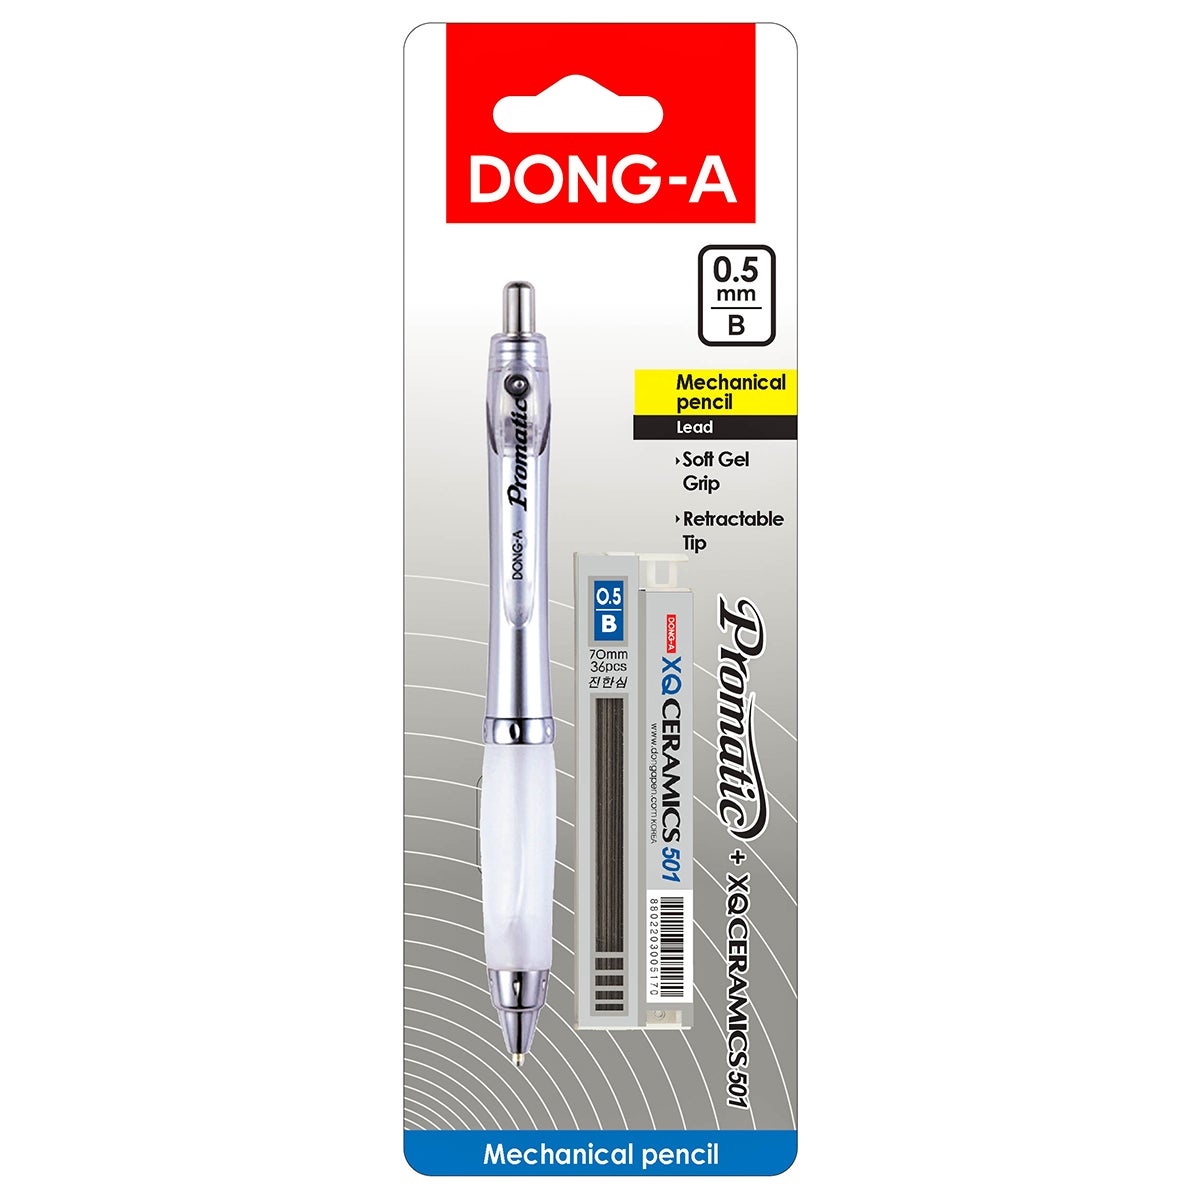 DONG-A Promatic Mechanical Pencil - White product image 1